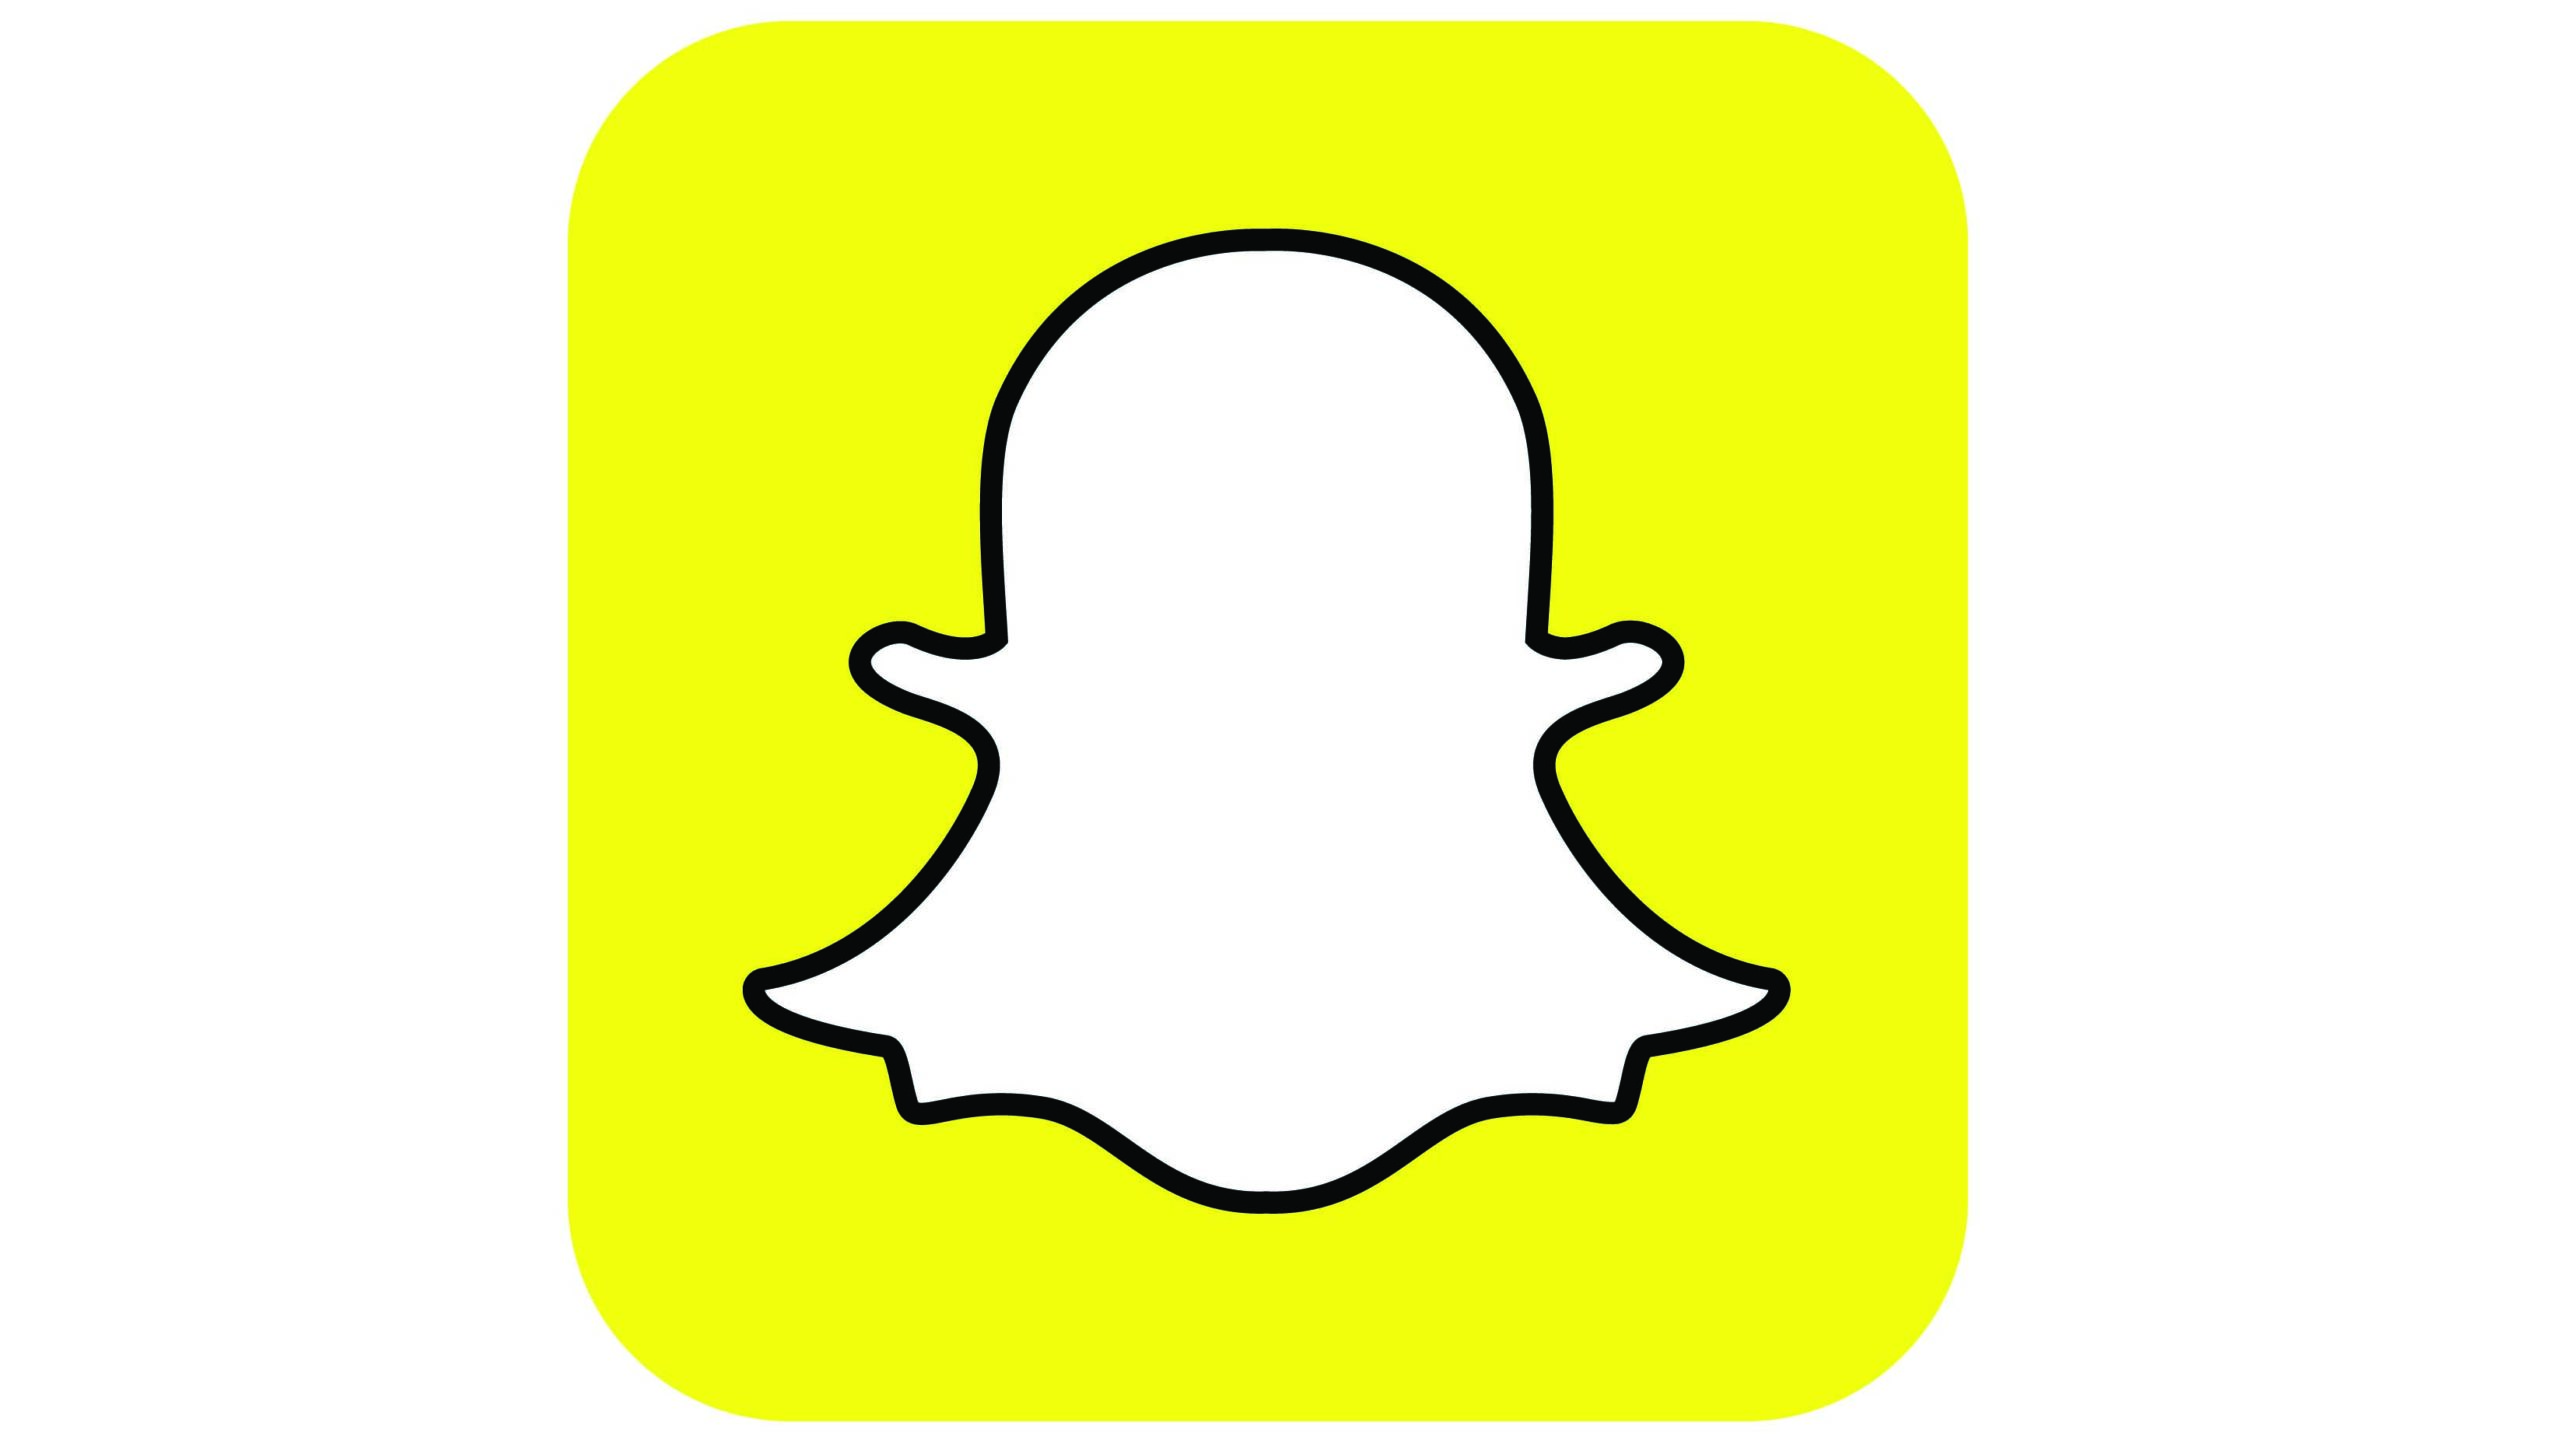 Snapchat in talks with majors to expand music use in posts - report ...